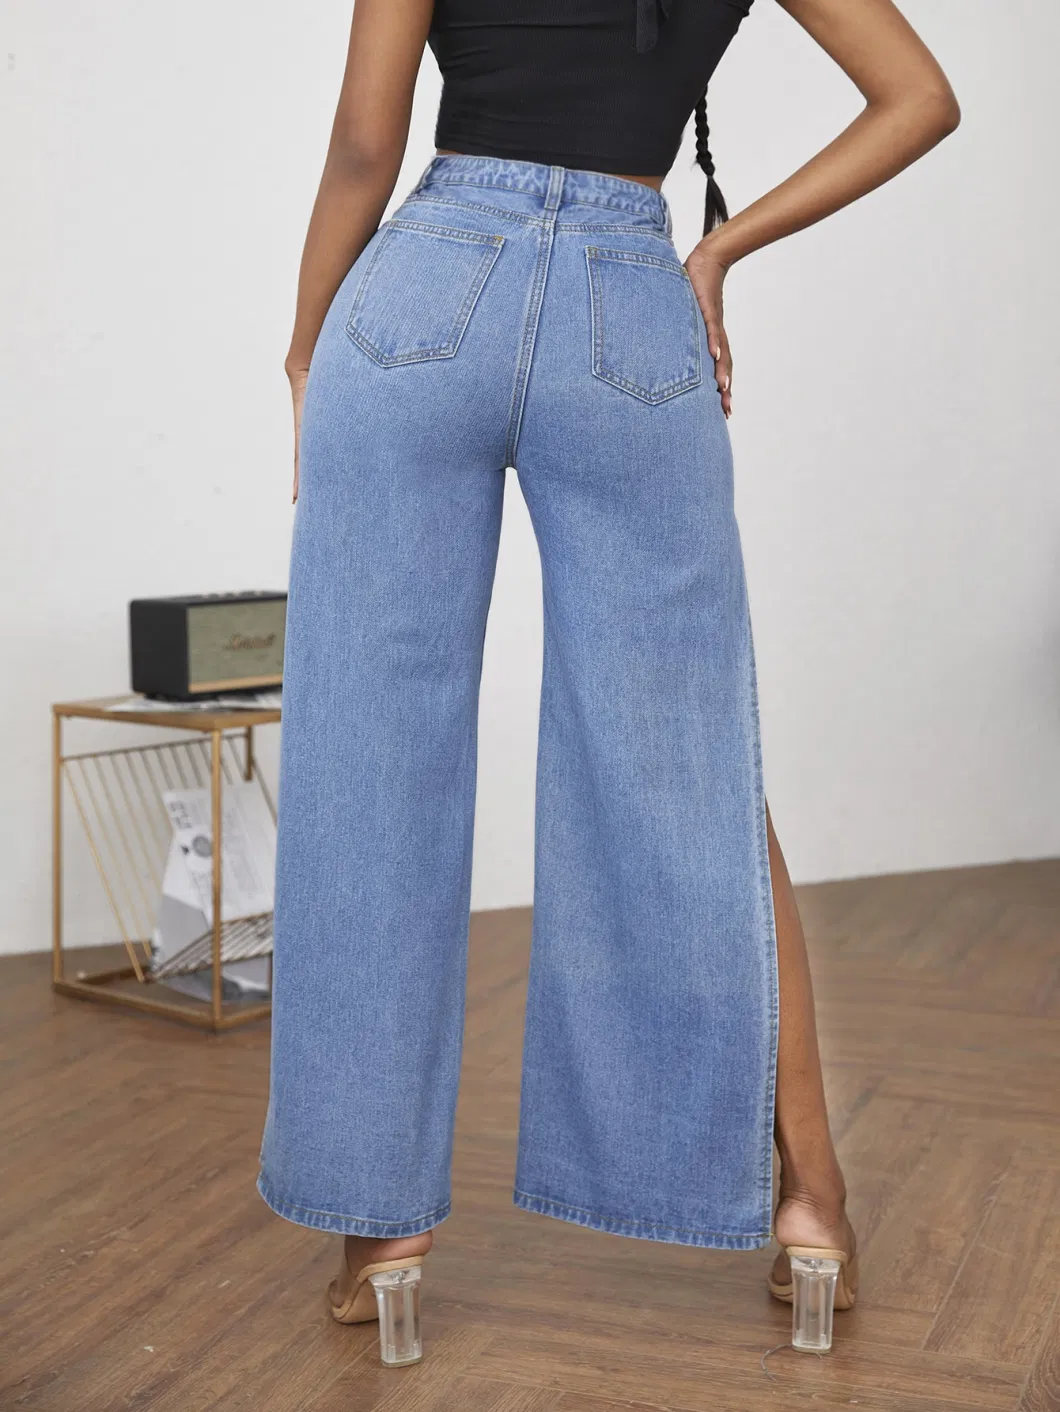 Middle Blue Color Wide Leg High Split on Both Side with Scratch on Front High Wasited Women New Fashion Design Denim Jeans